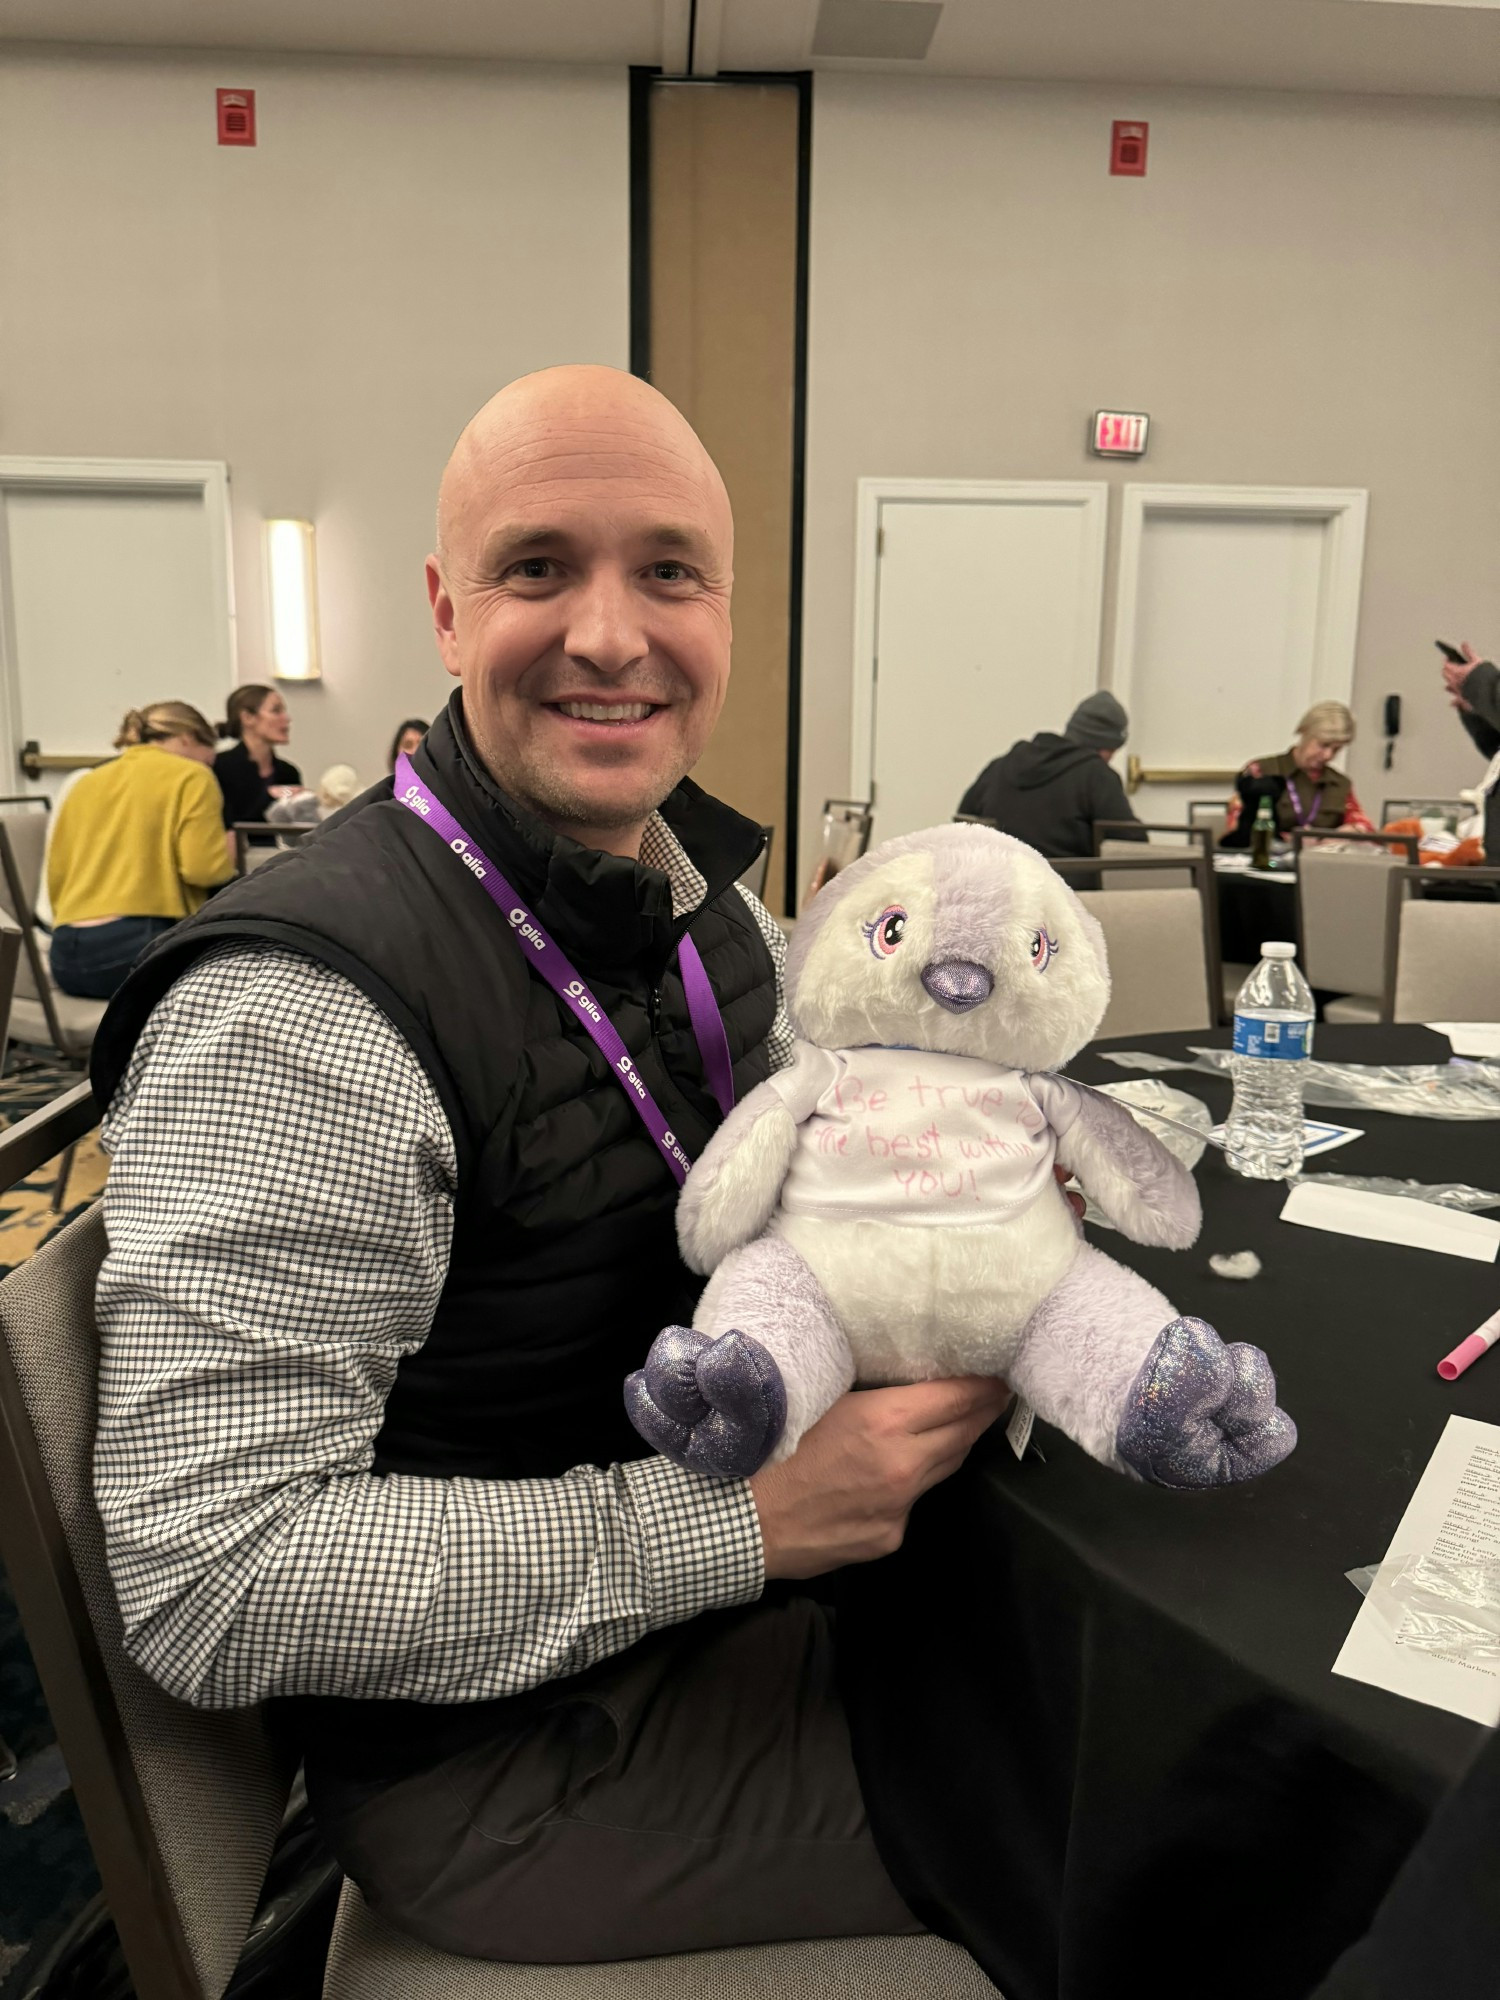 A Glia Leader showing off the build a bear he made!